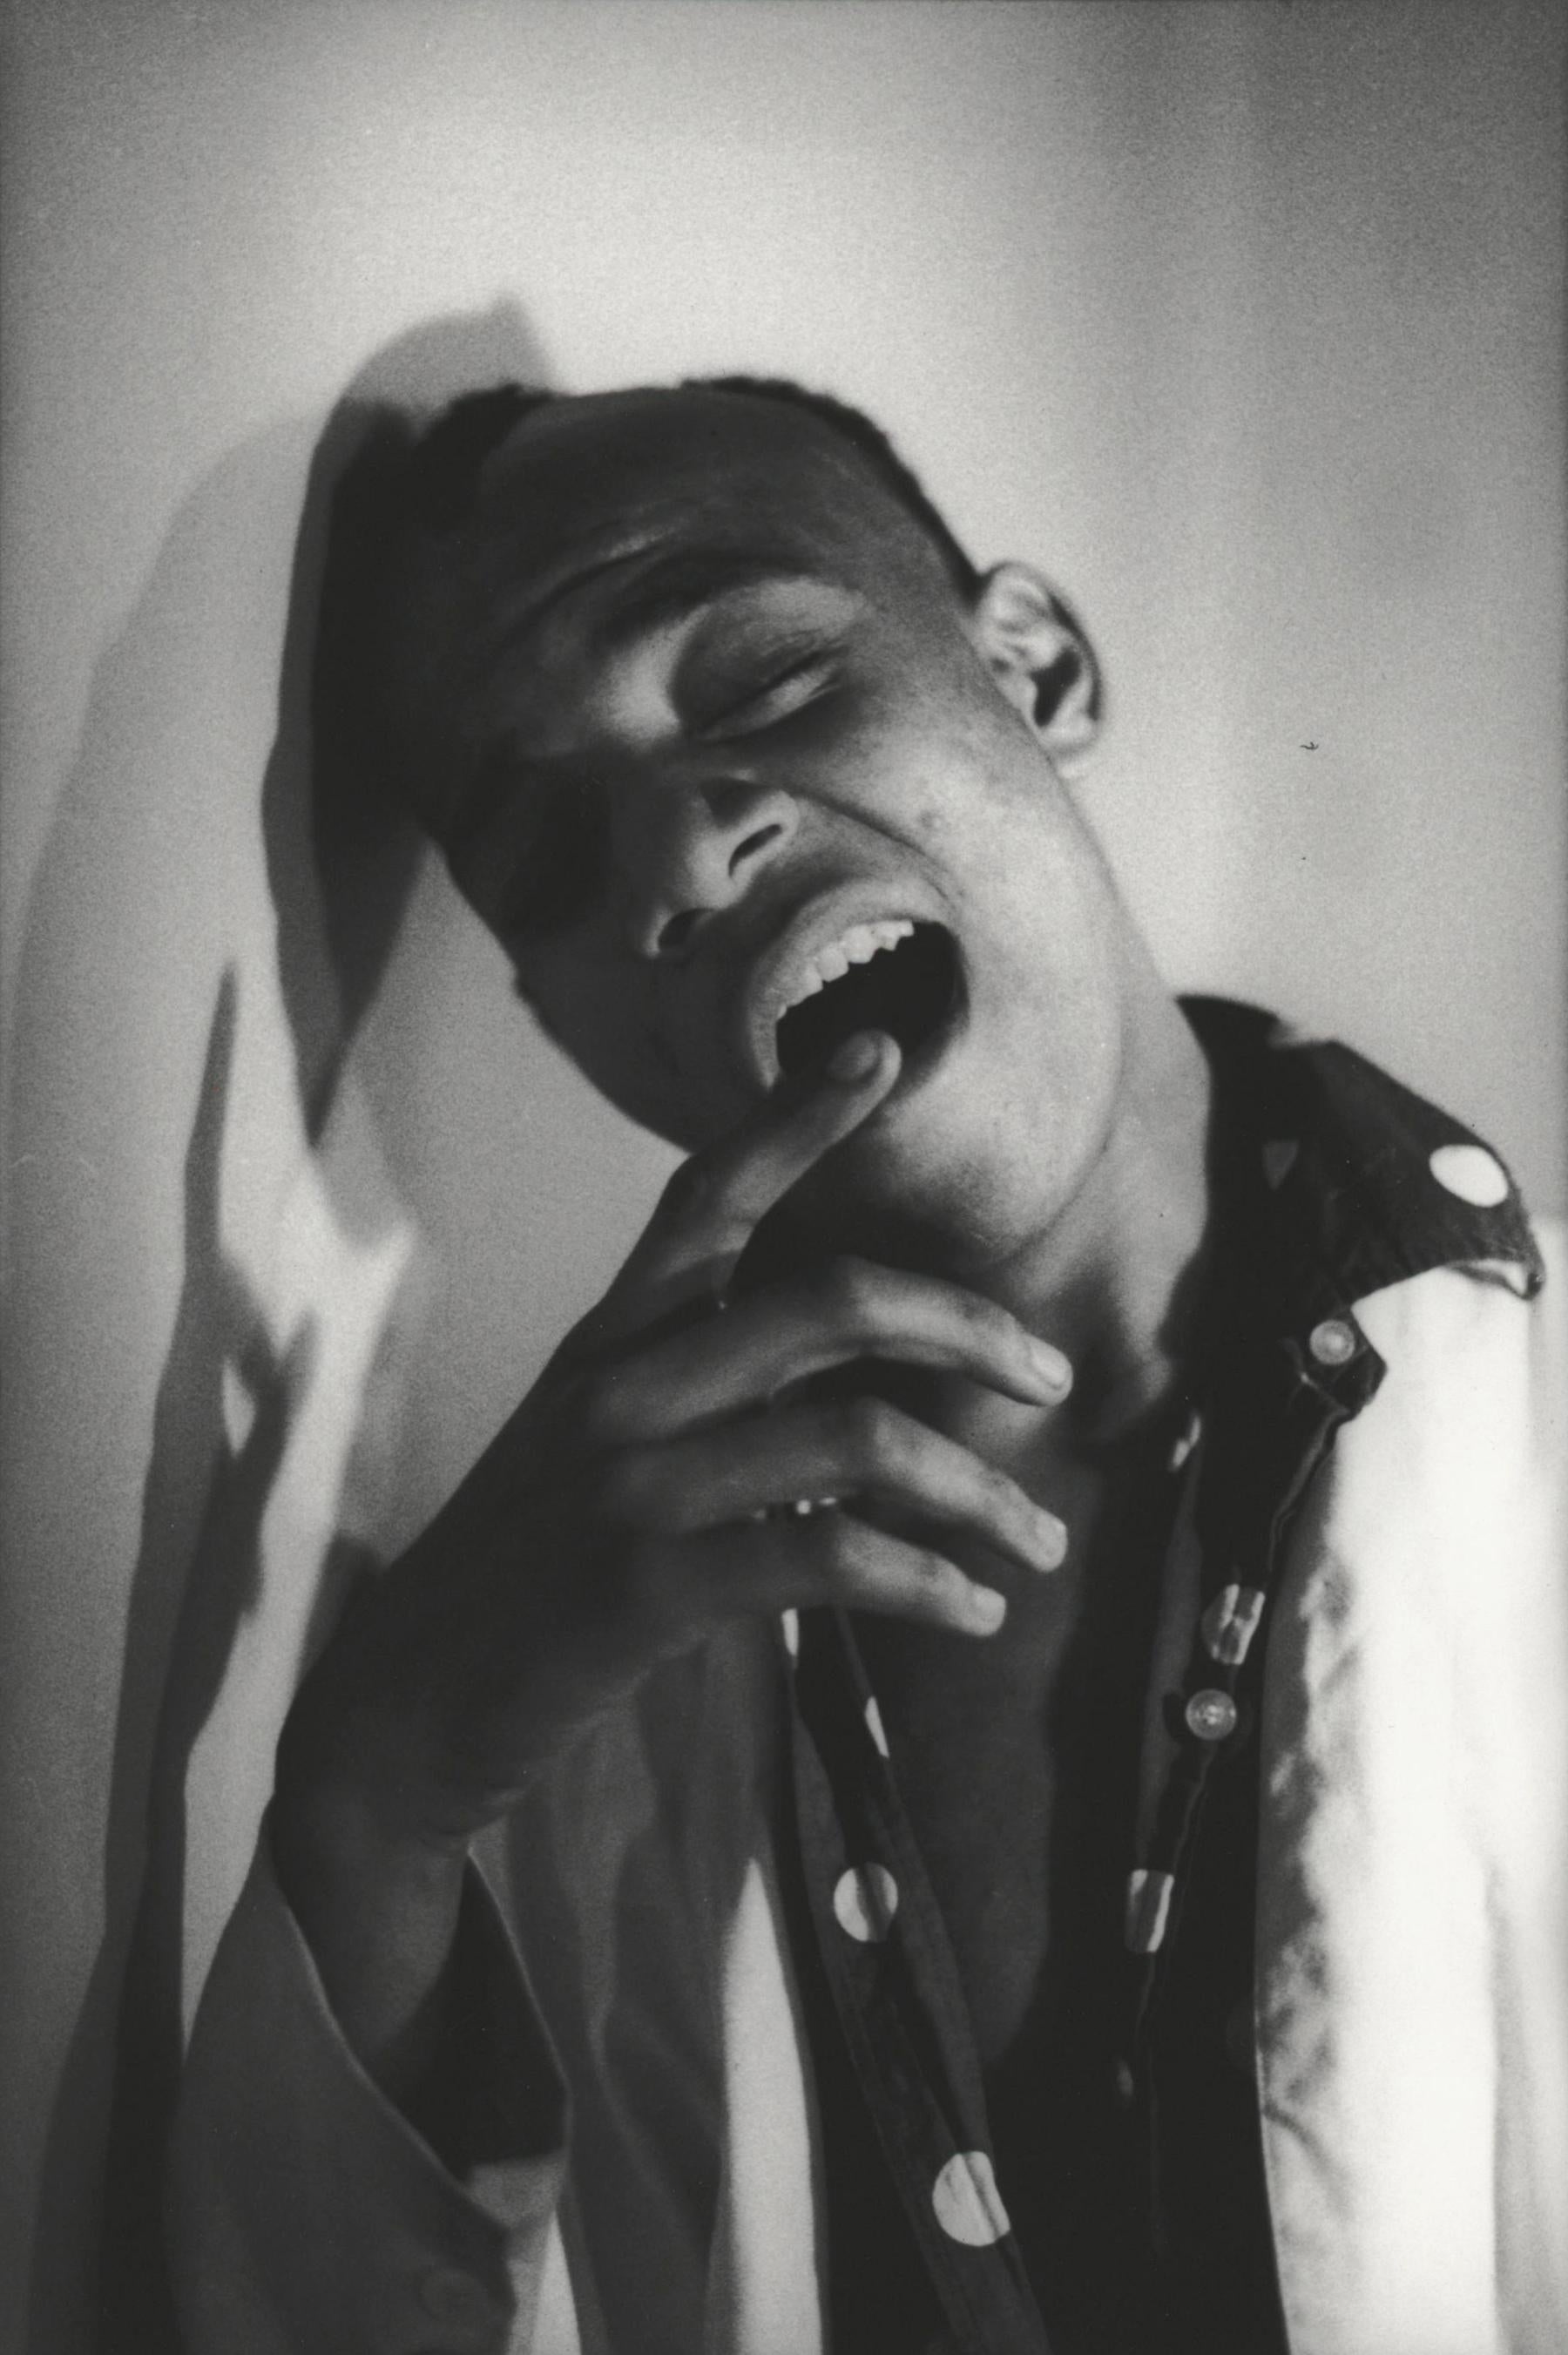 Basquiat photograph by Nick Taylor of Gray